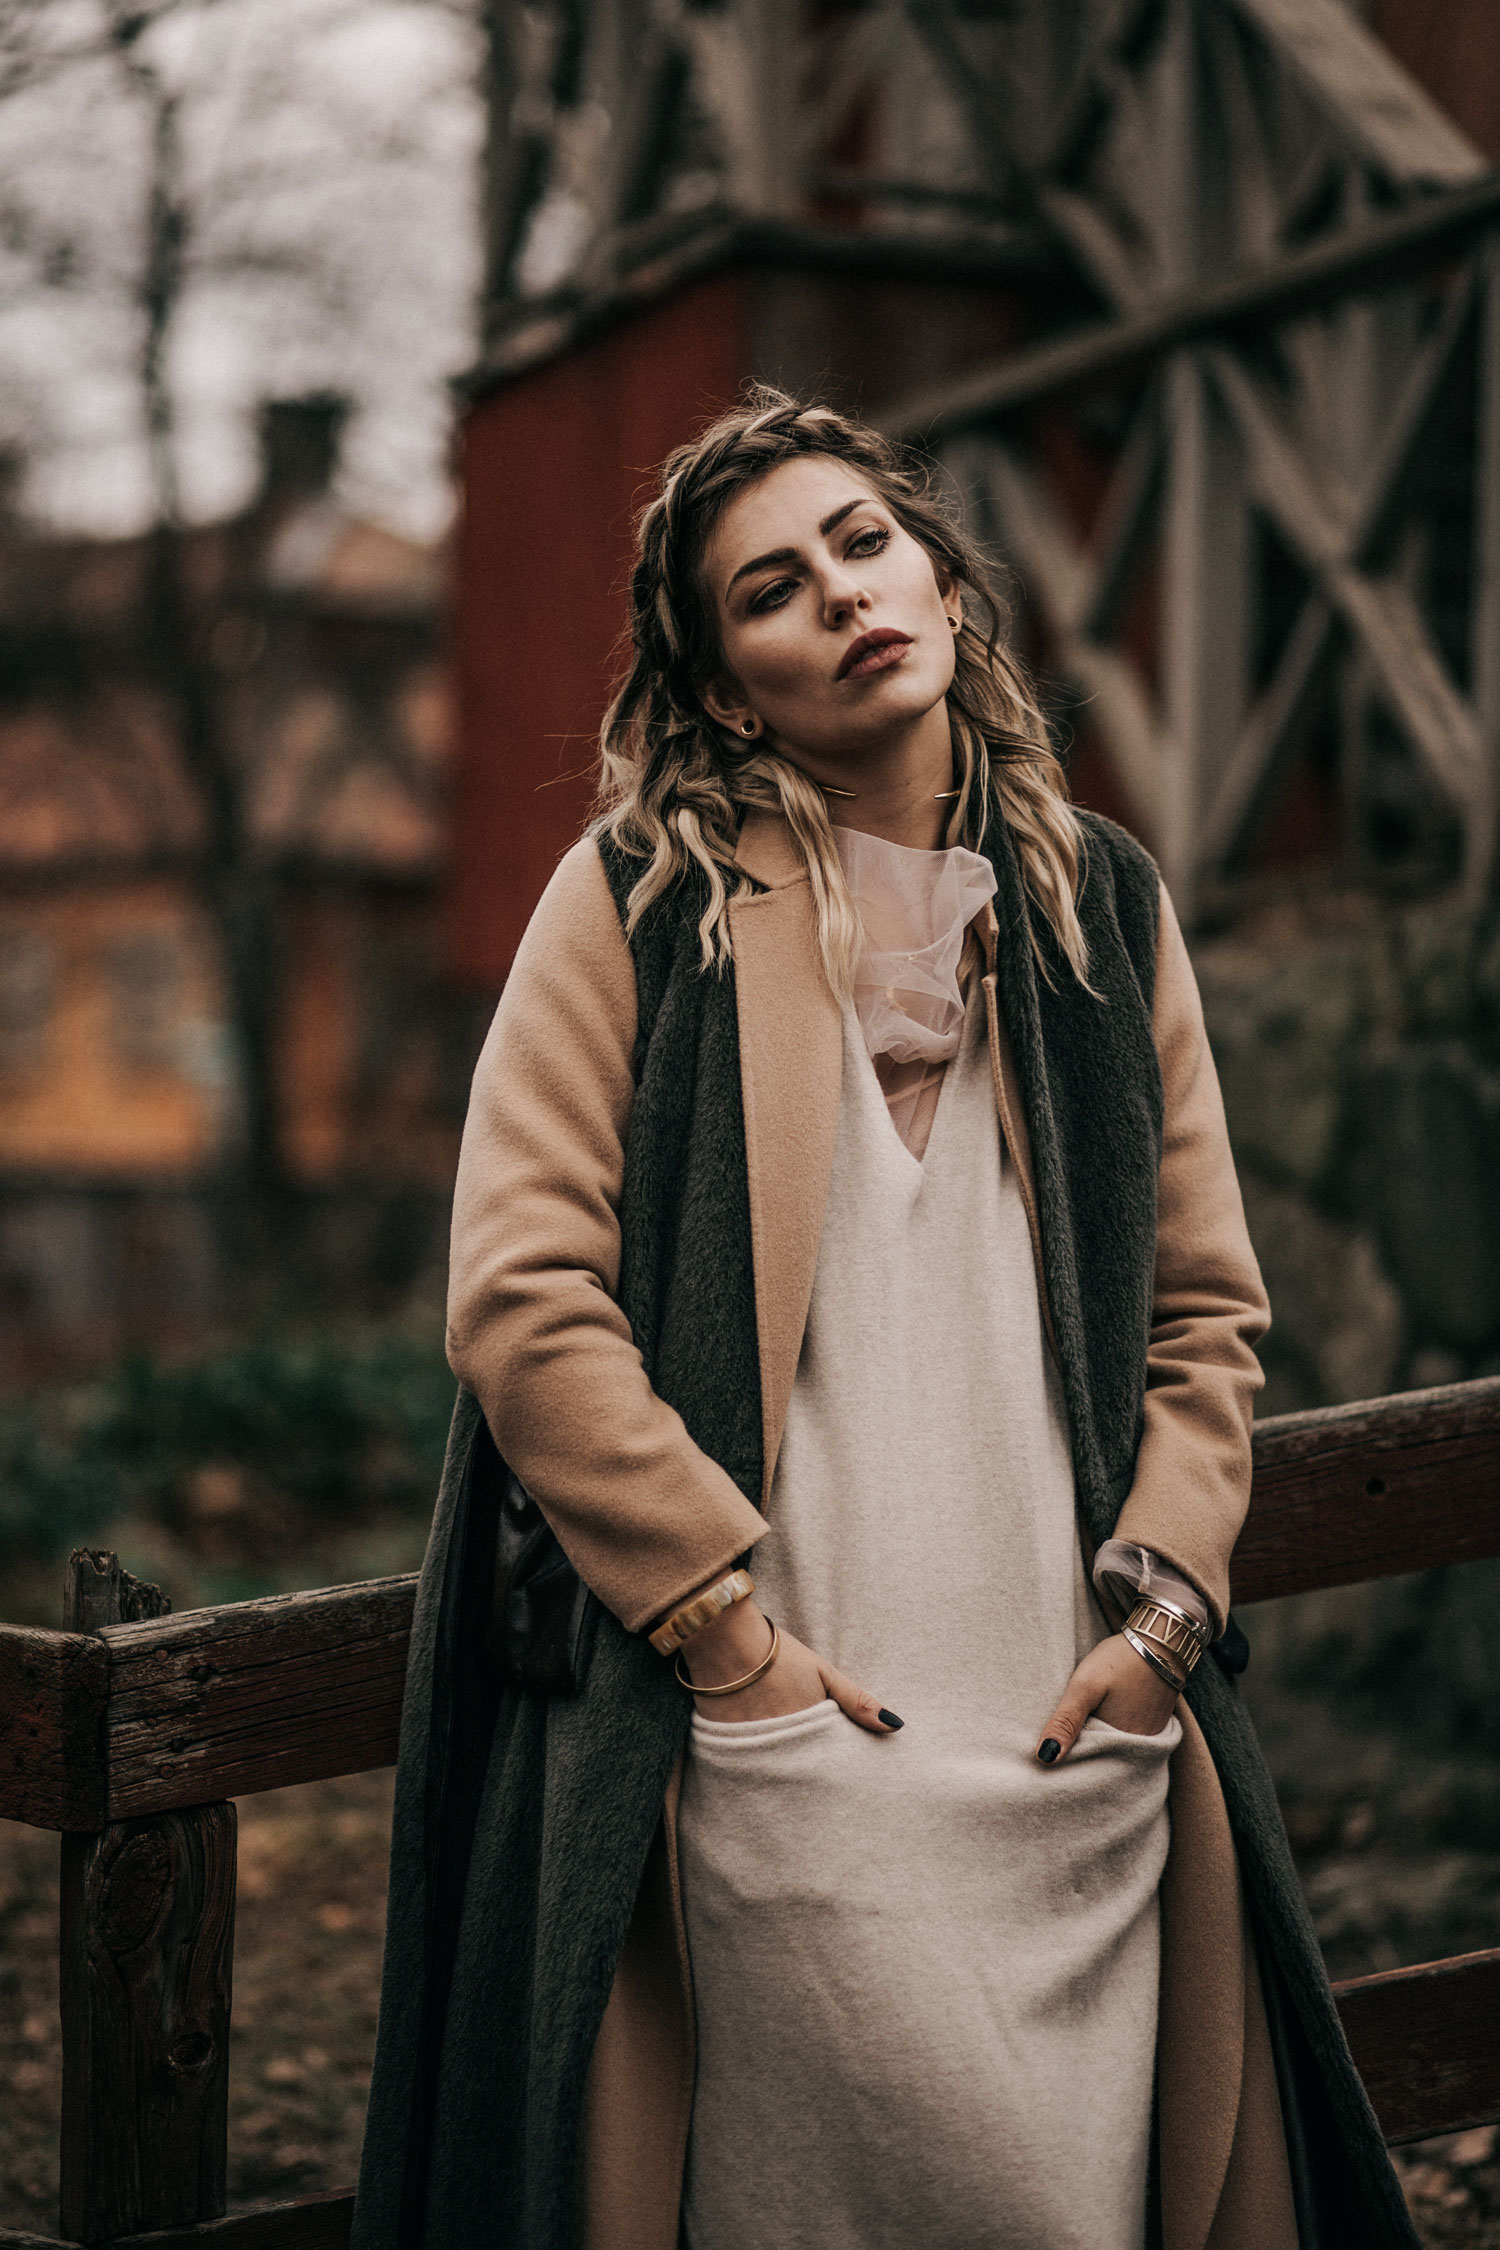 Fashion Editorial: Traditional Sweden | style: folklore, winter, moody, edgy, natural + 5 tips for a more hygge life | location: Skansen, Stockholm